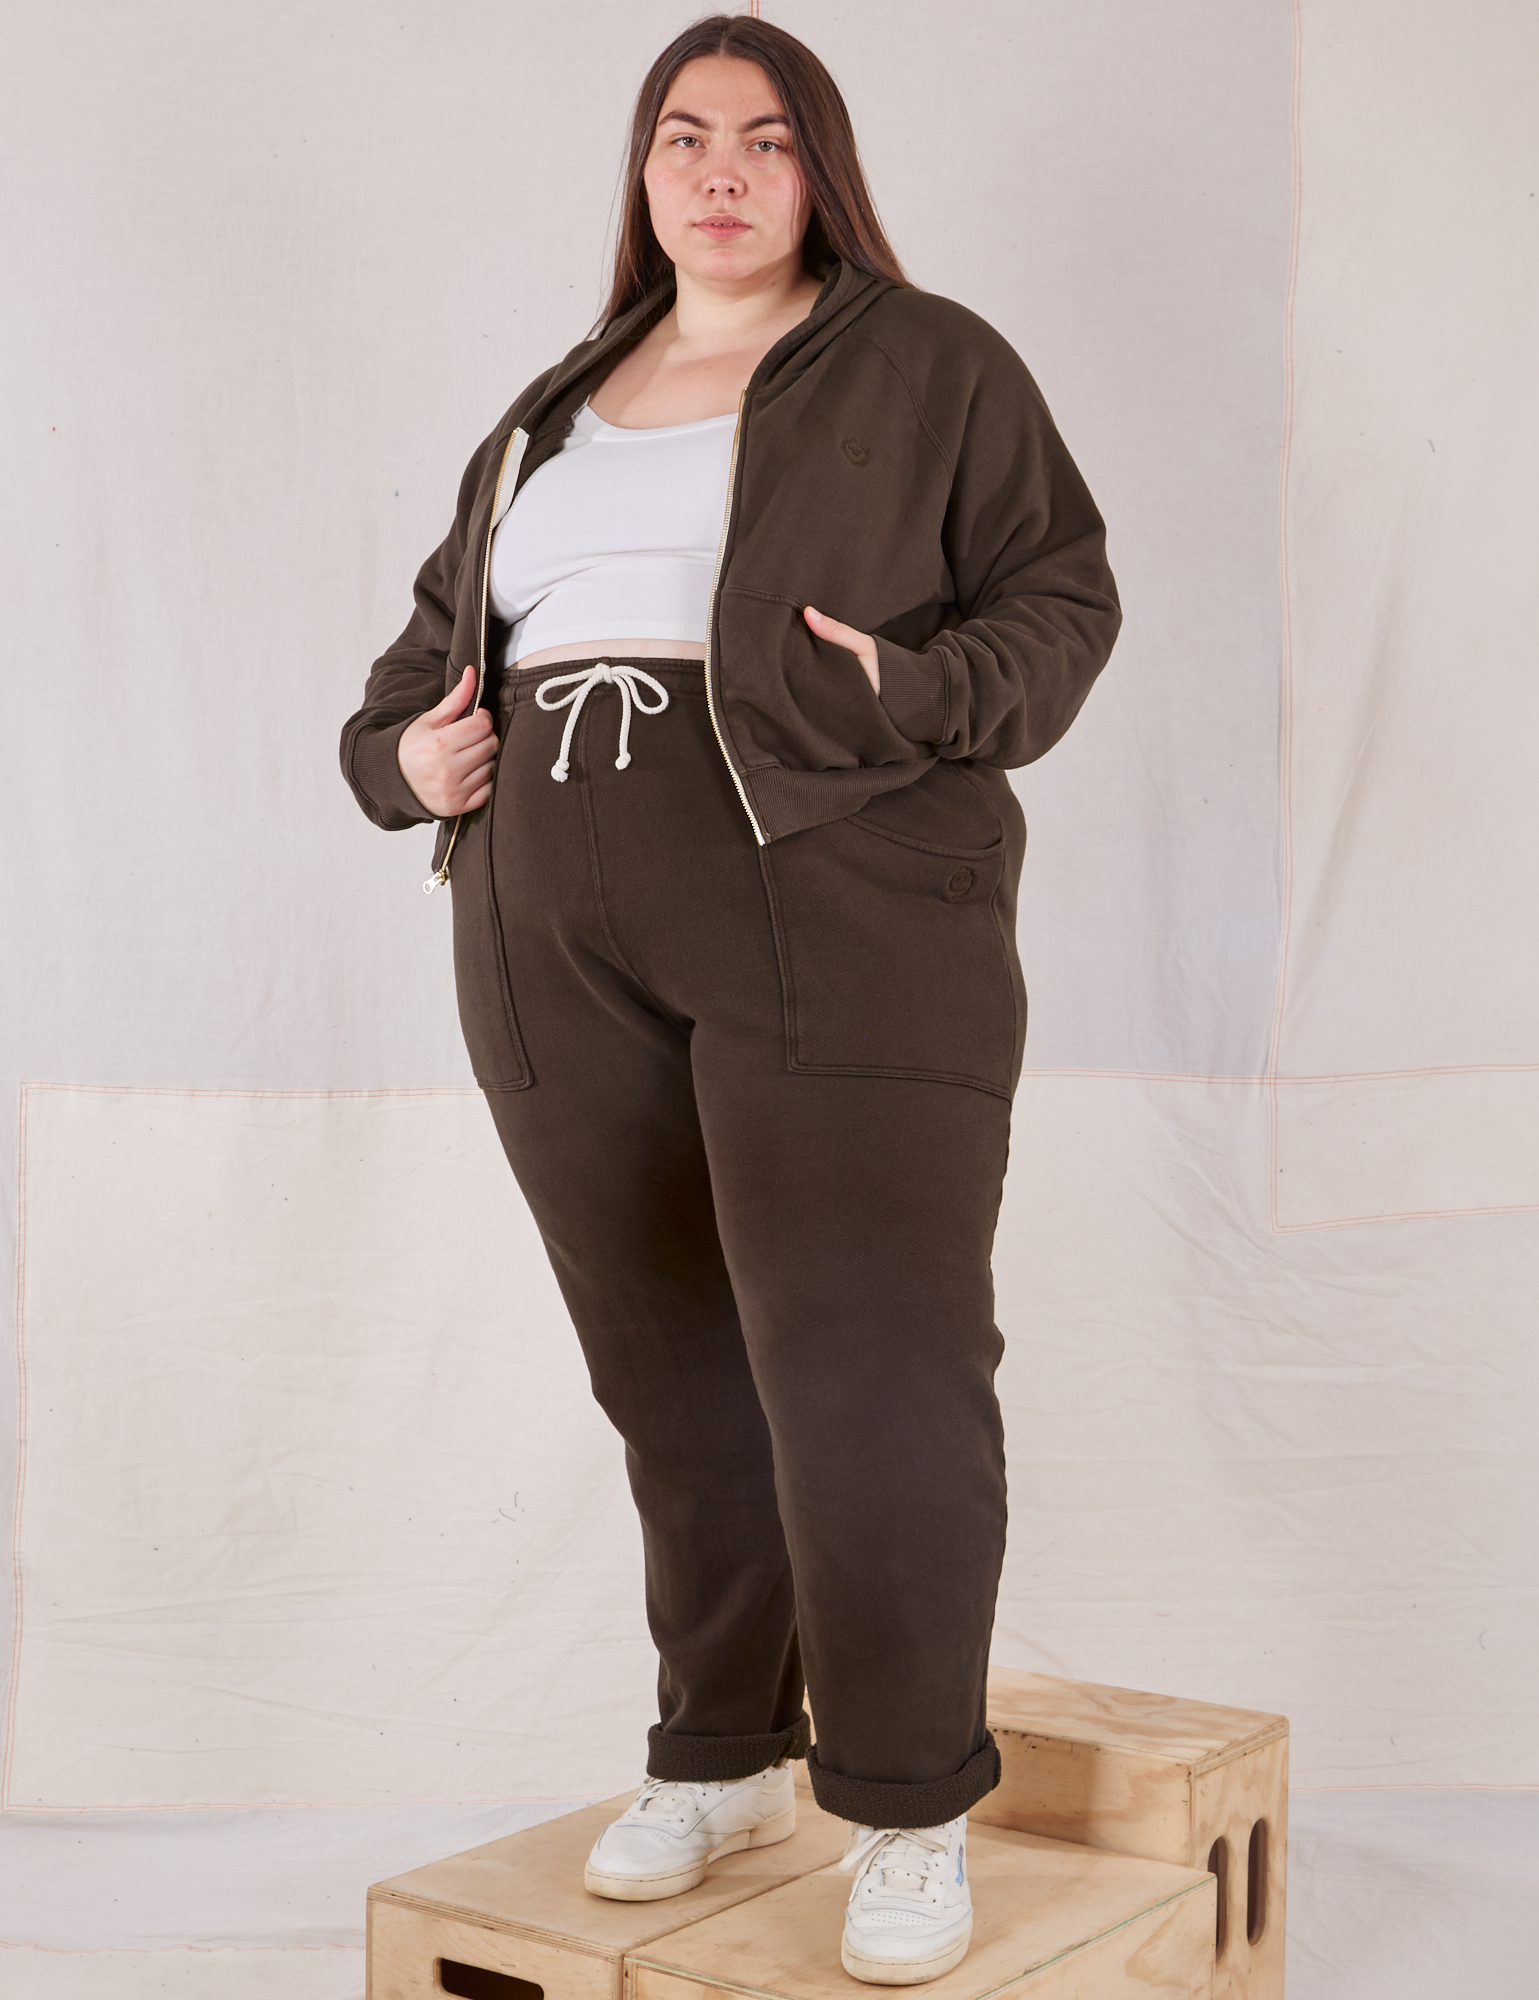 Marielena is 5&#39;8&quot; and wearing 1XL Rolled Cuff Sweat Pants in Espresso Brown with matching Cropped Zip Hoodie and a vintage off-white Cropped Tank underneath.